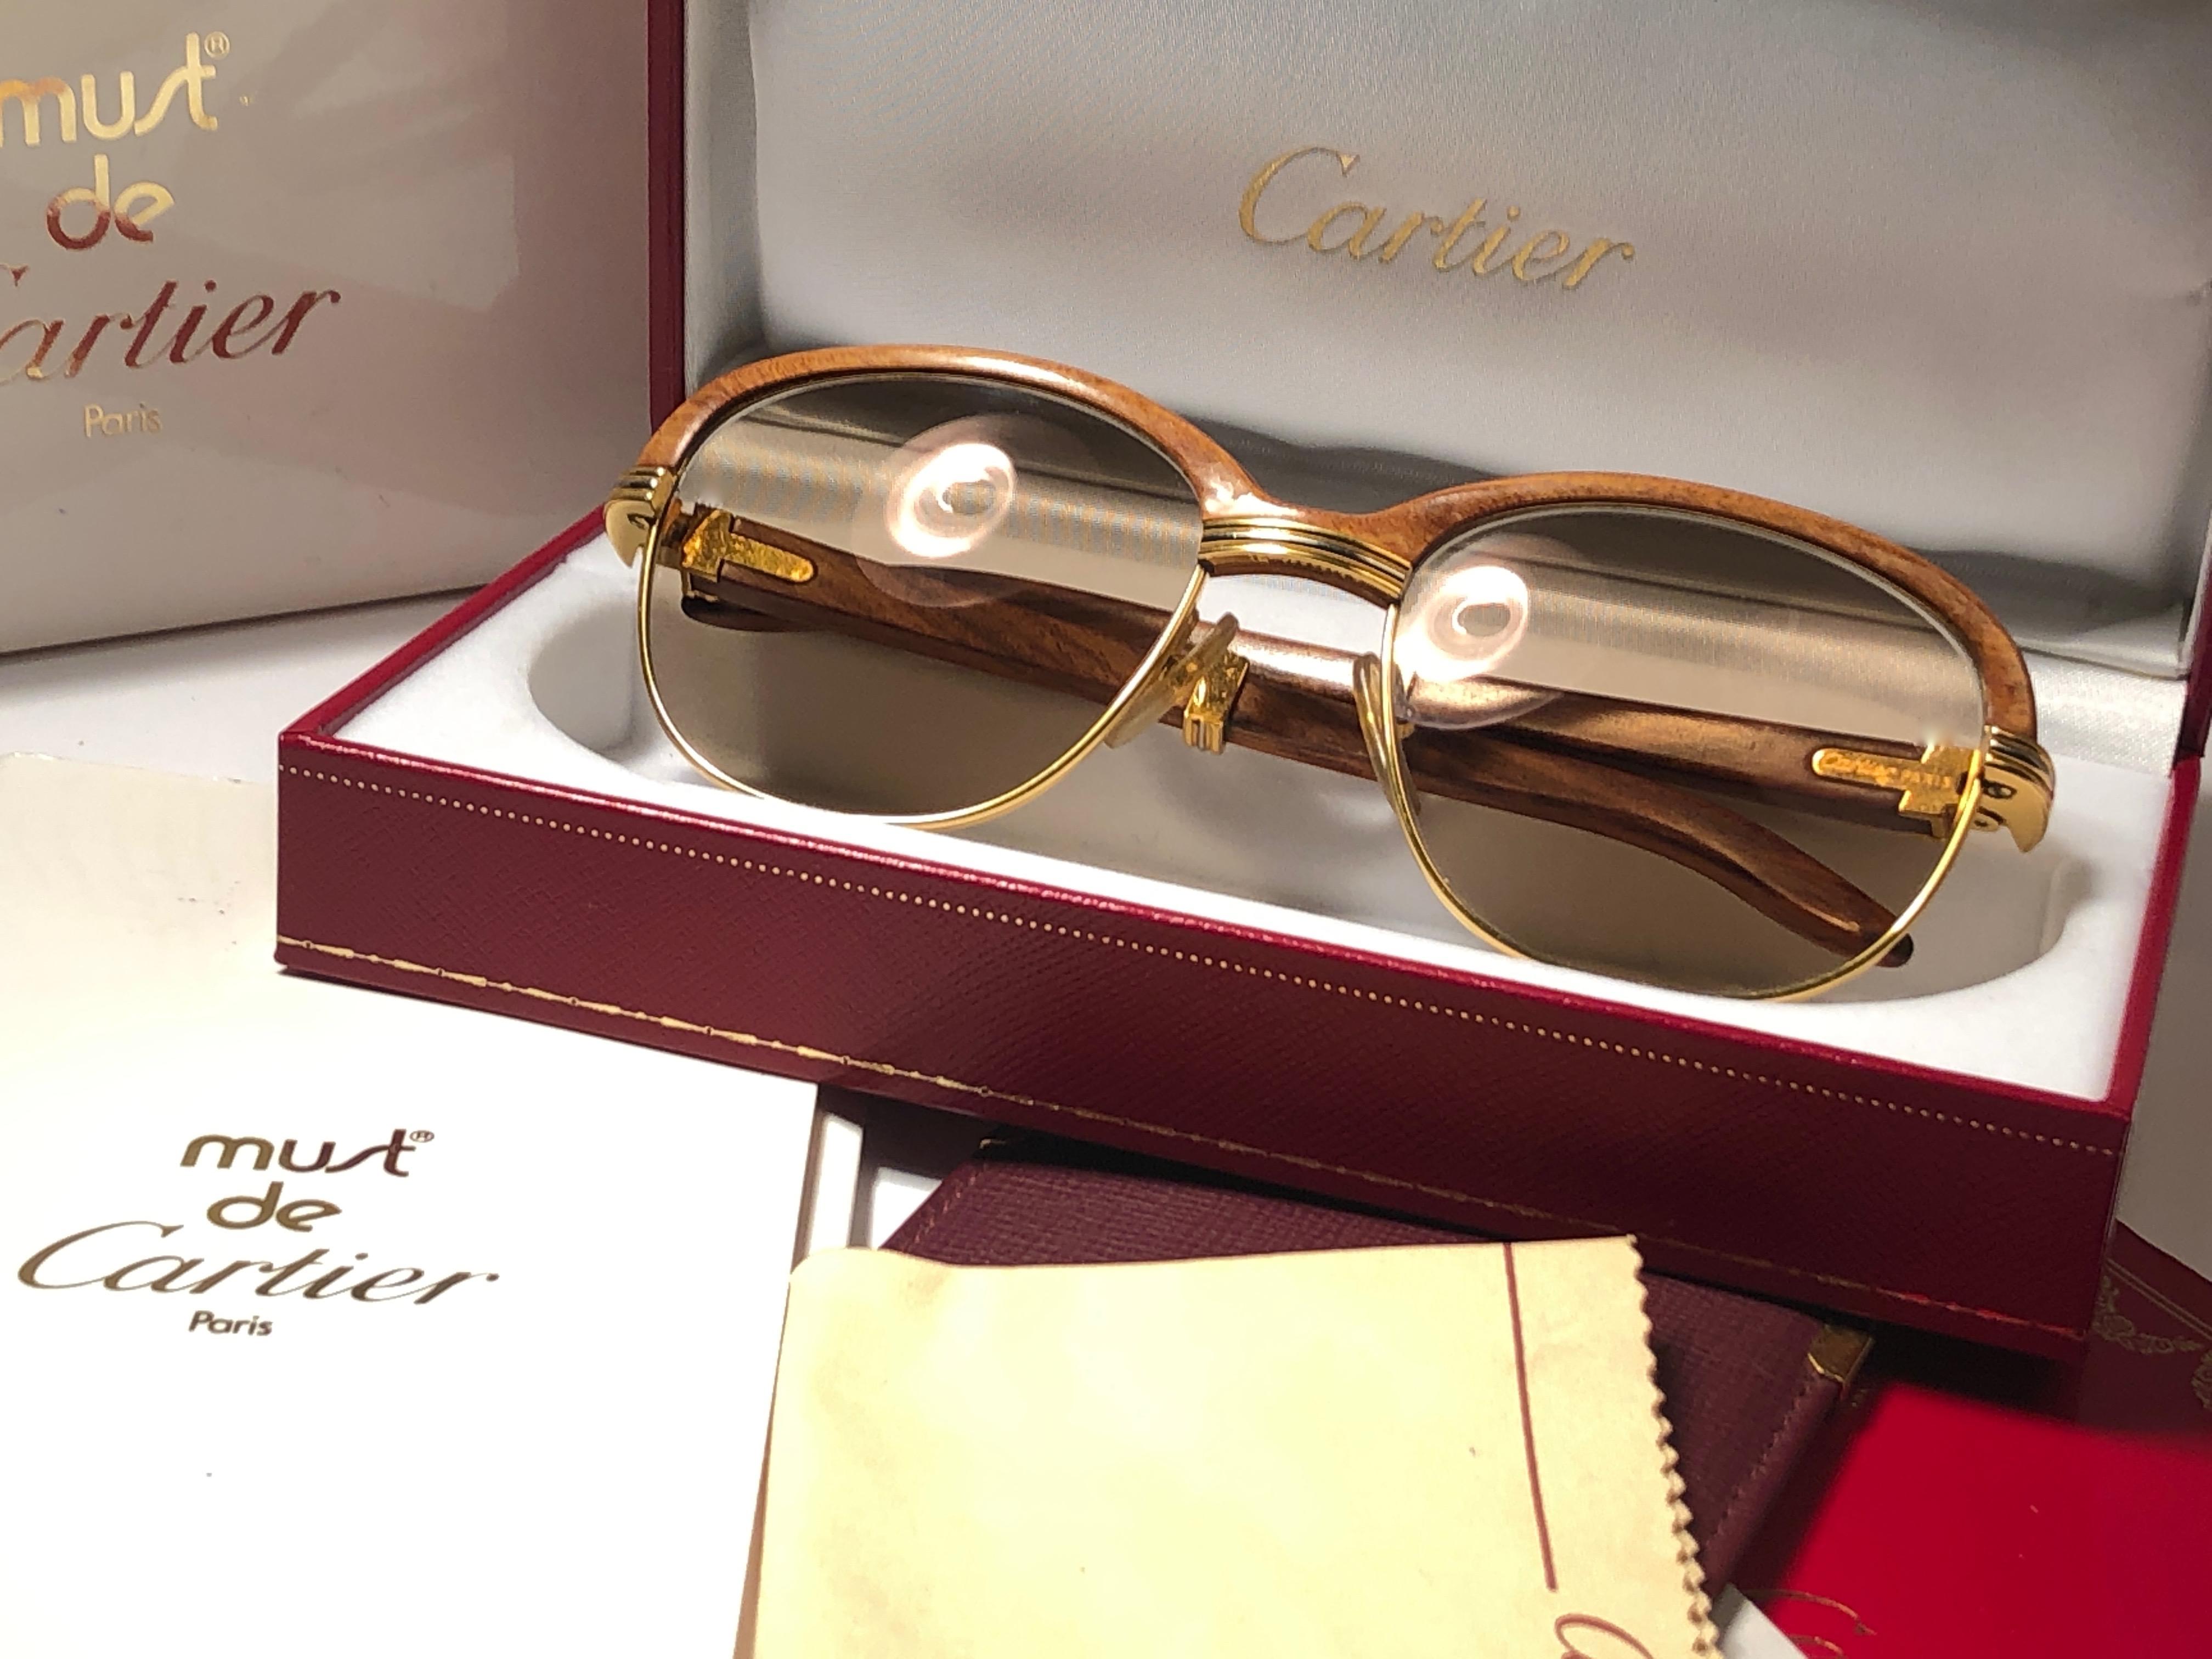 Original 1990 Cartier Malmaison hardwood banana light wood sunglasses with honey brown Cartier (uv protection) lenses. 
Front and sides in yellow and white gold and has the famous wooden front. Temples are also Palisander combined with gold.